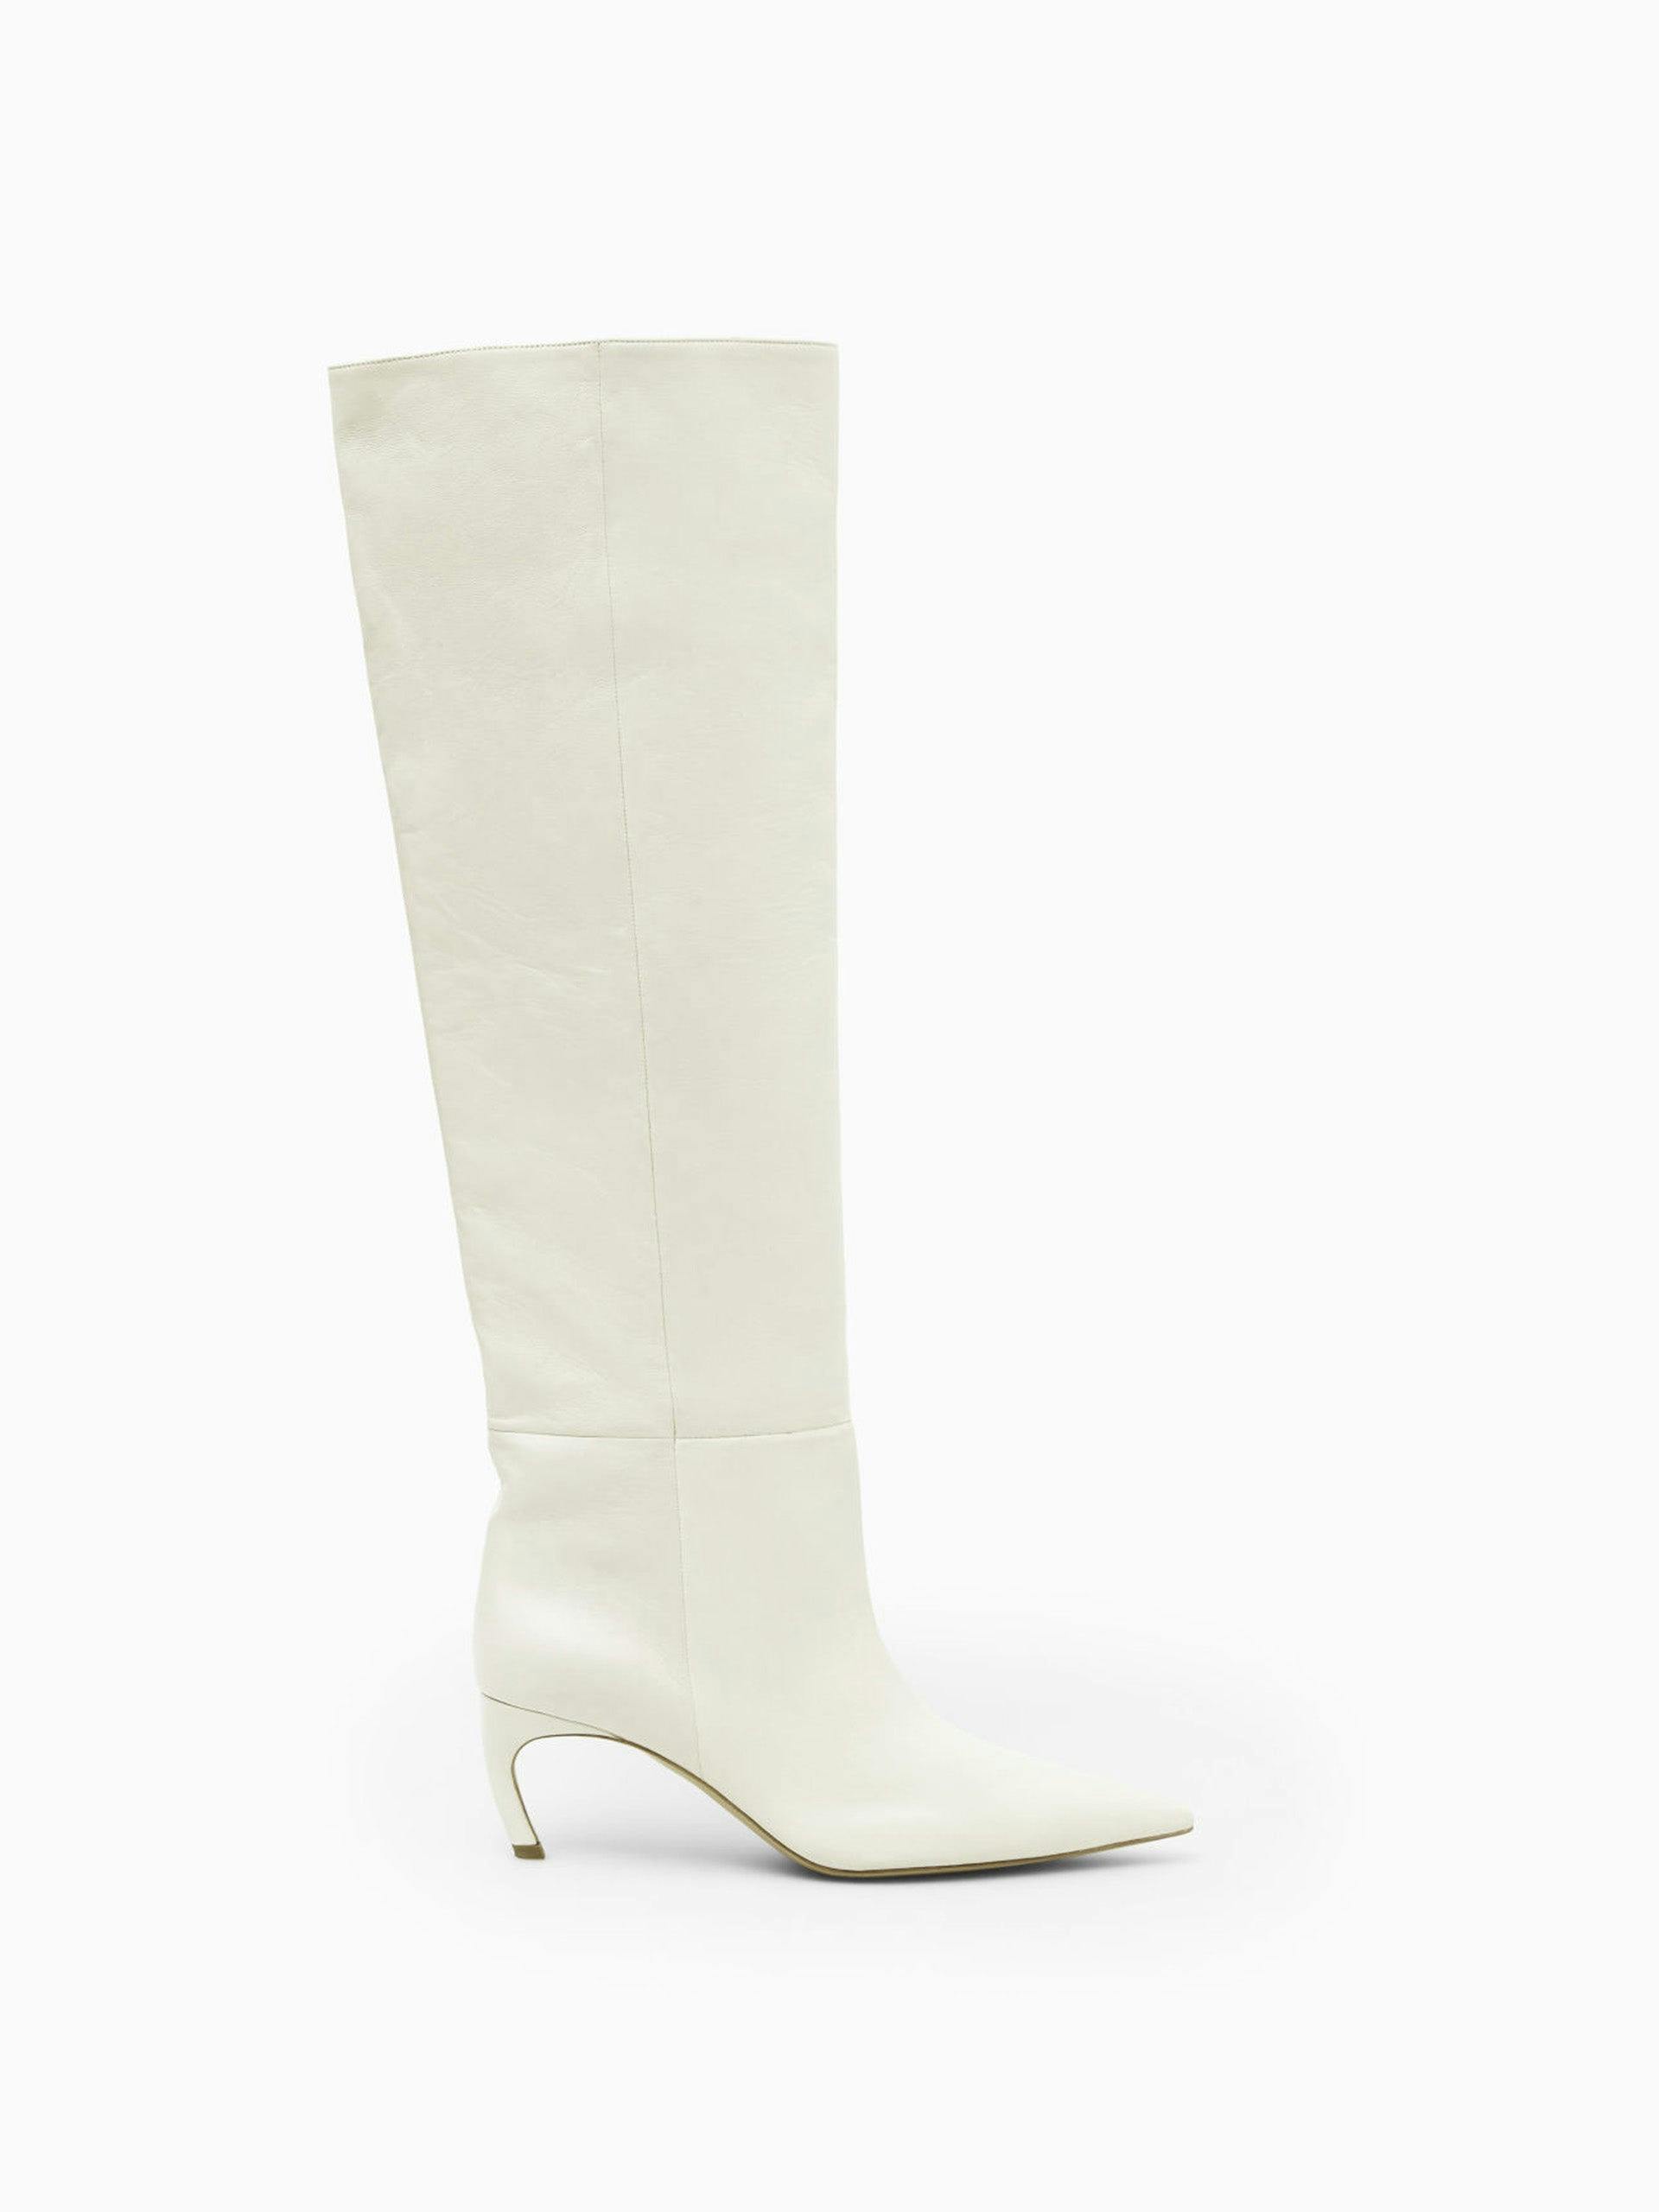 Pointed-toe leather knee-high boots